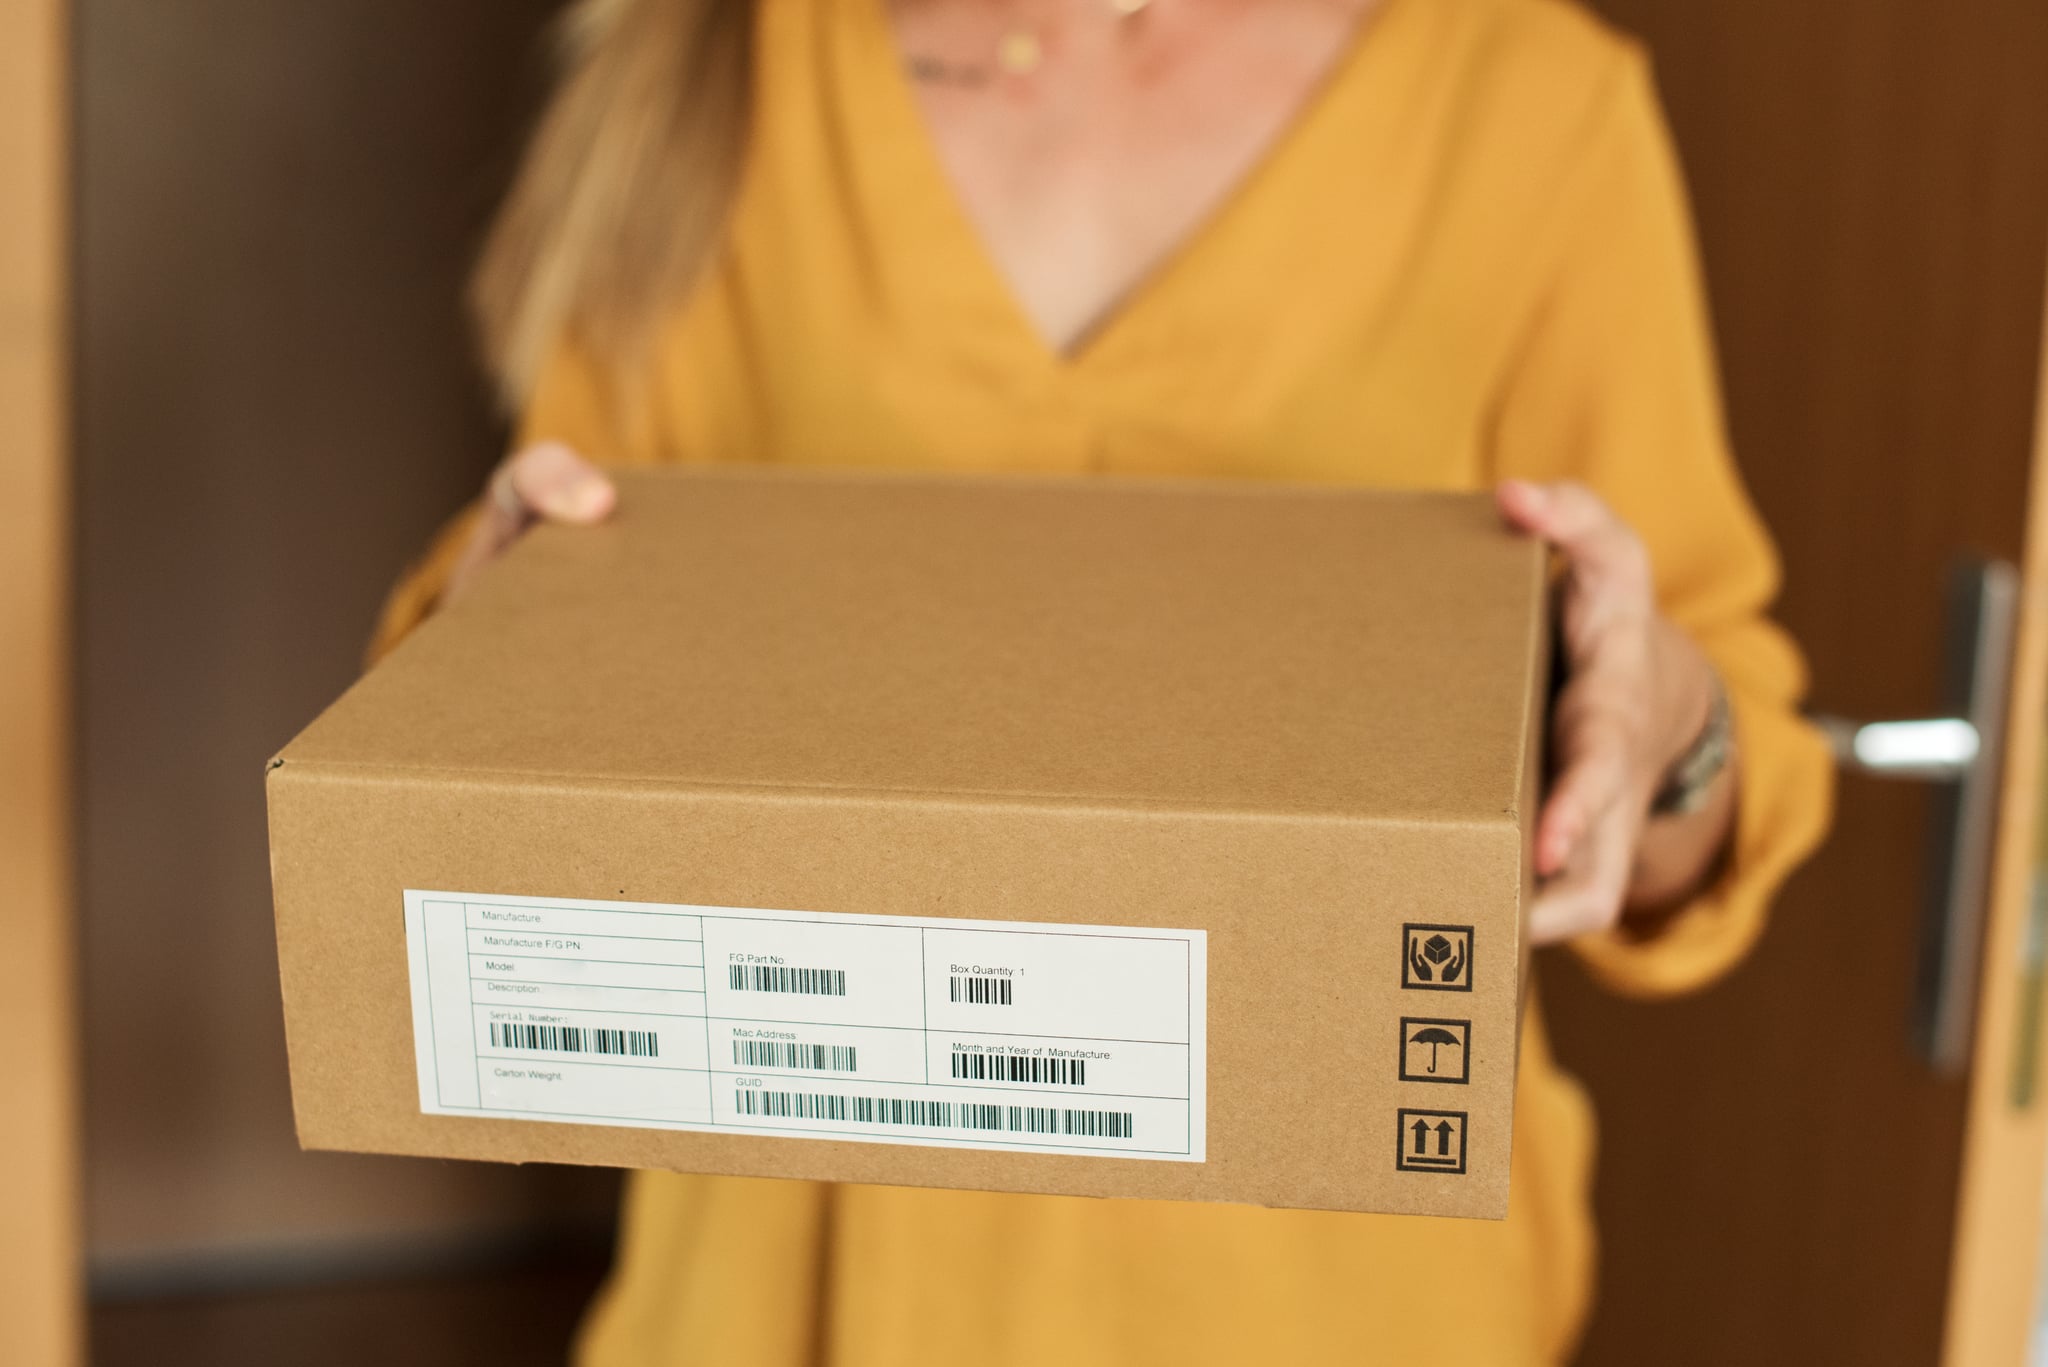 What to Know About Amazon Deliveries During Coronavirus POPSUGAR